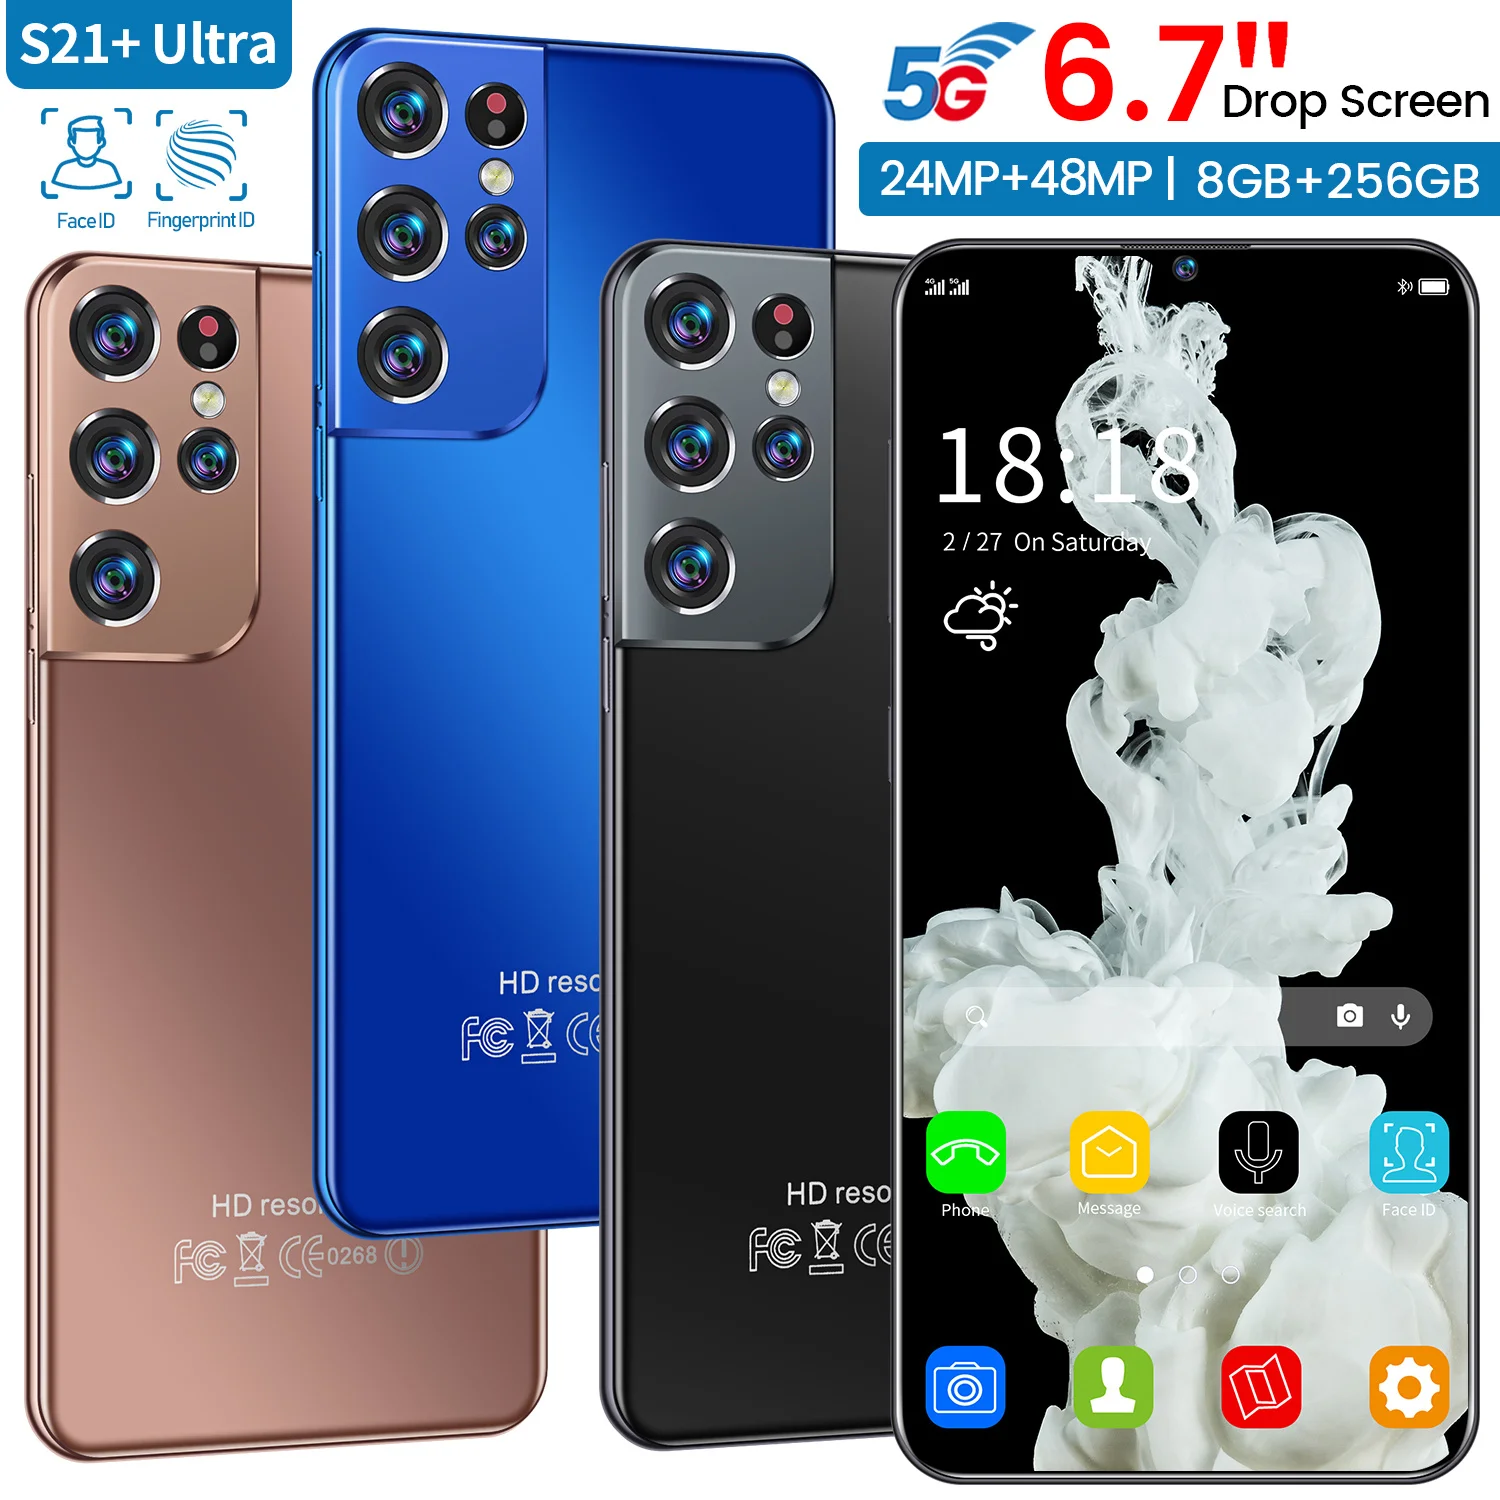 

Cell phone 5G Smartphone S21+Ultra 8GB RAM 256GB ROM Mobile Phone 6.7Inch Face ID Unlocked Android 10.1 System Dual Sim